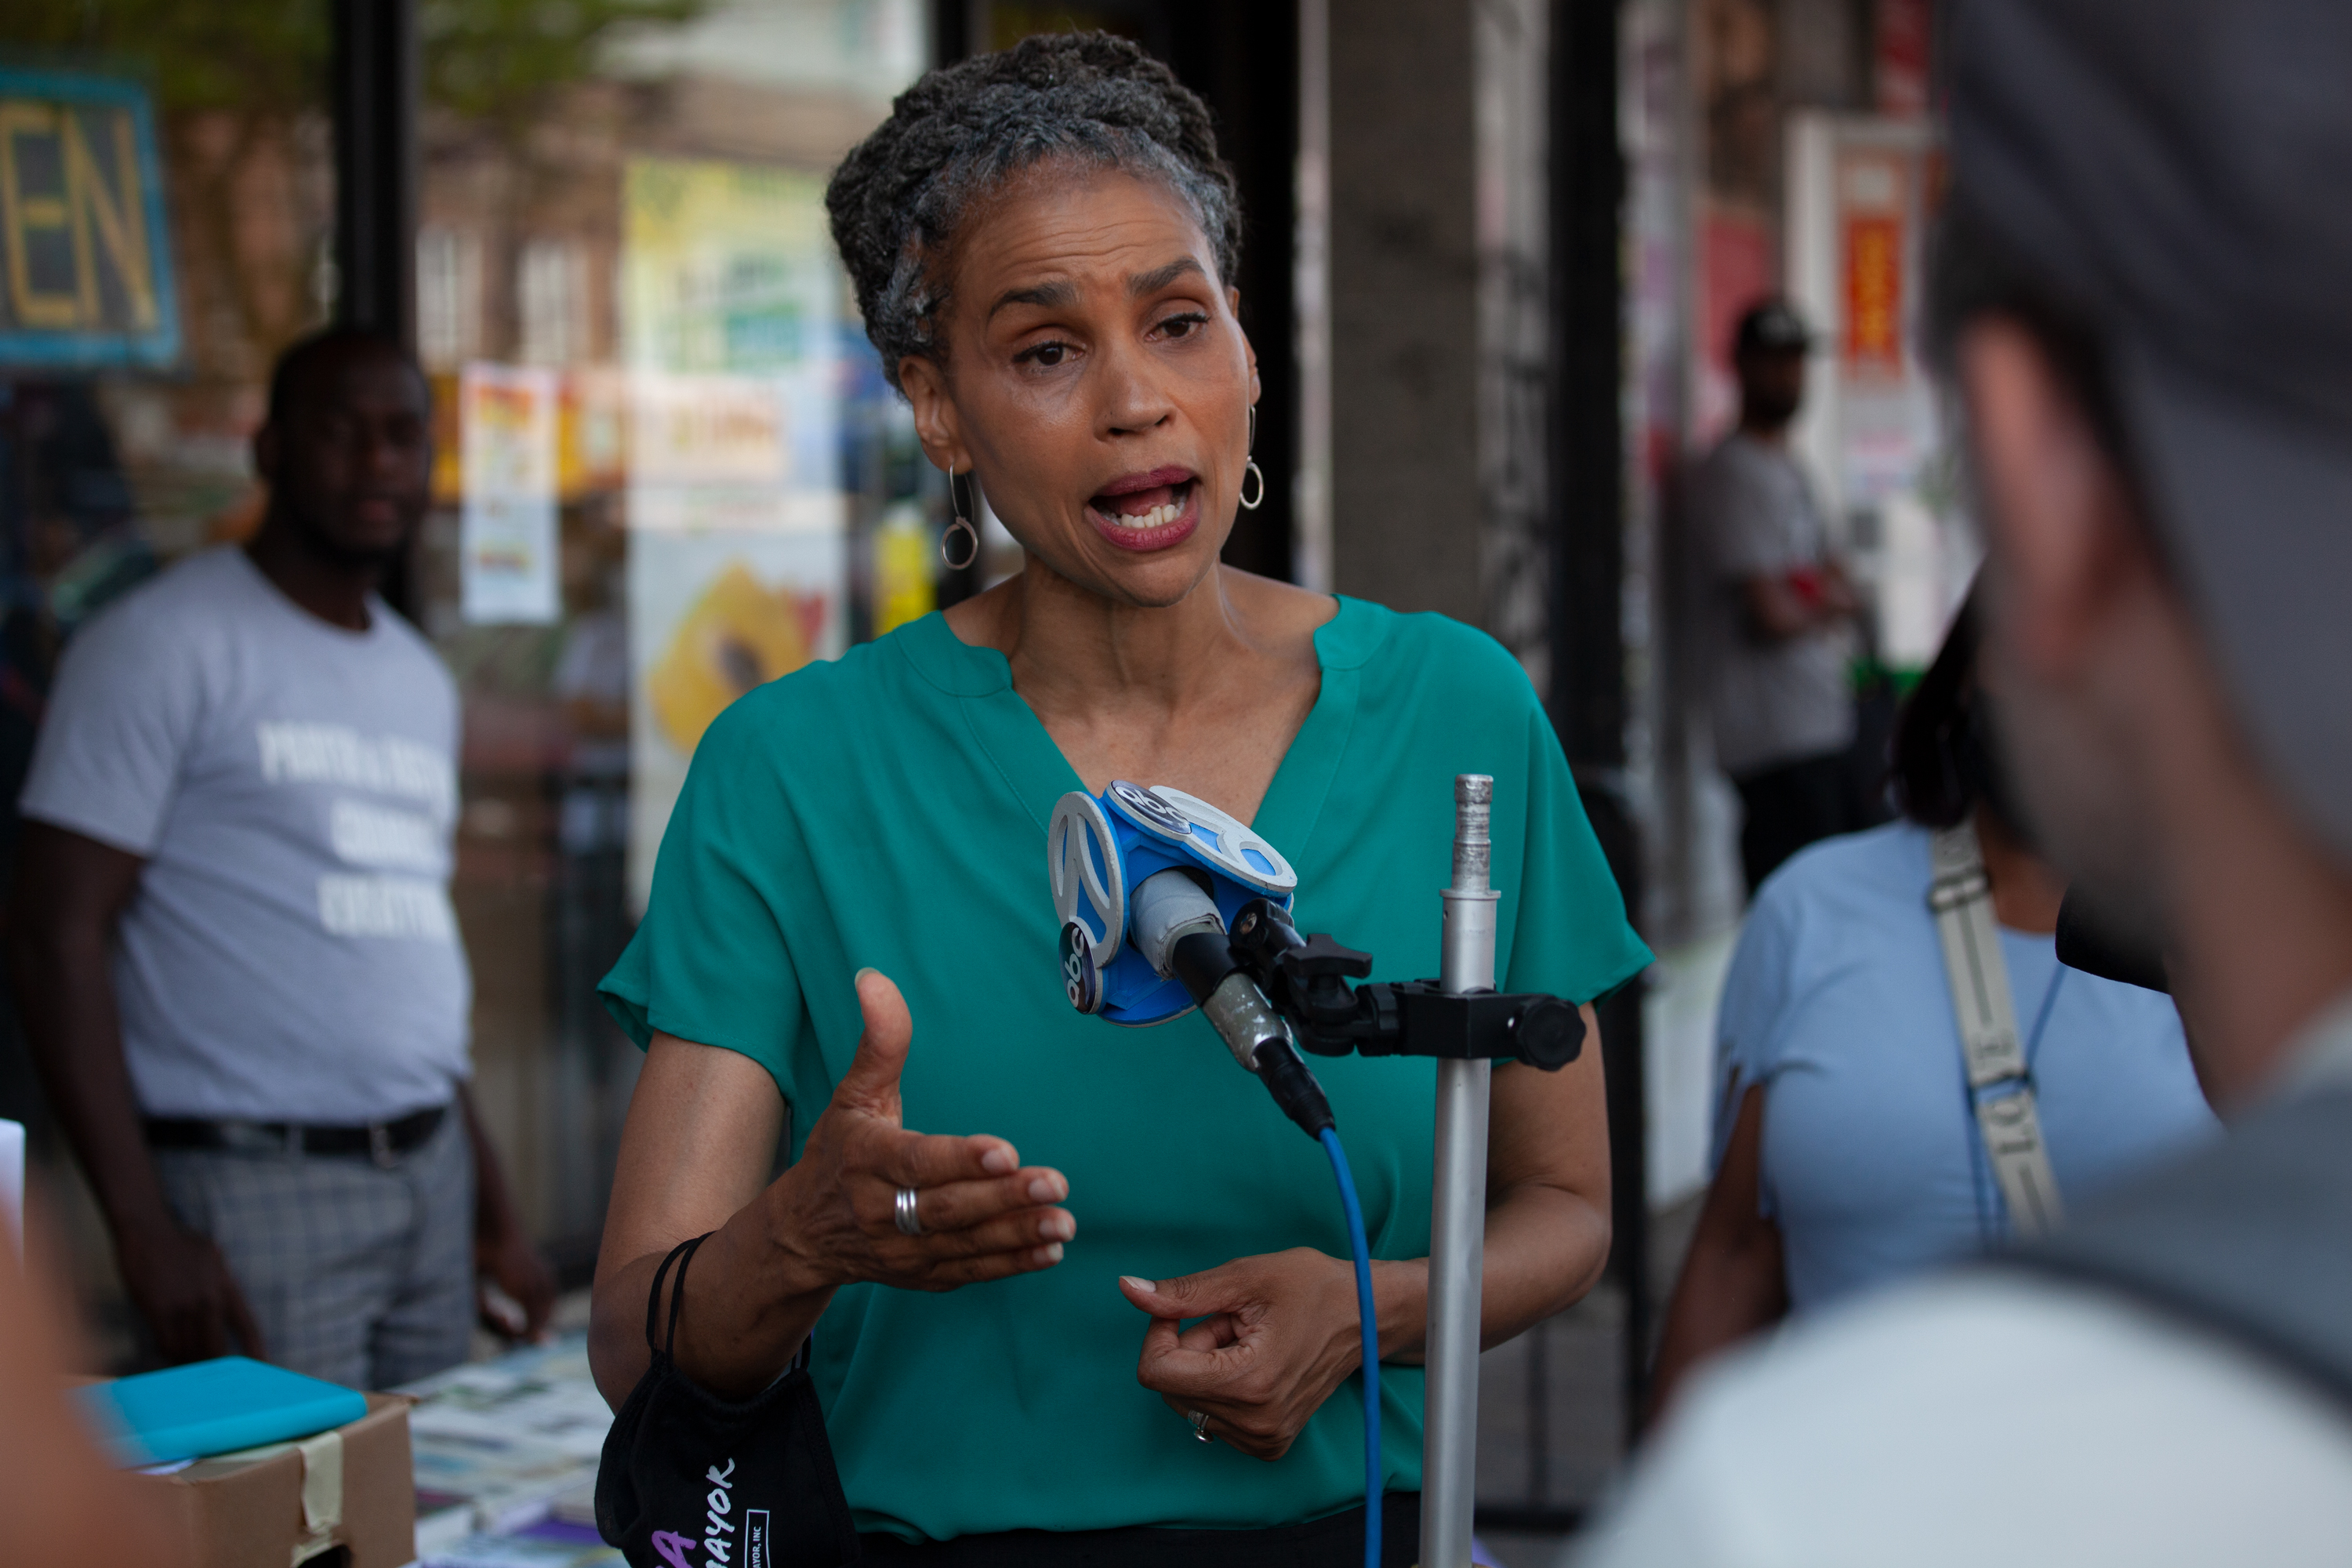 Maya Wiley campaigns in East Flatbush the day before the Democratic primary, June 21, 2021.